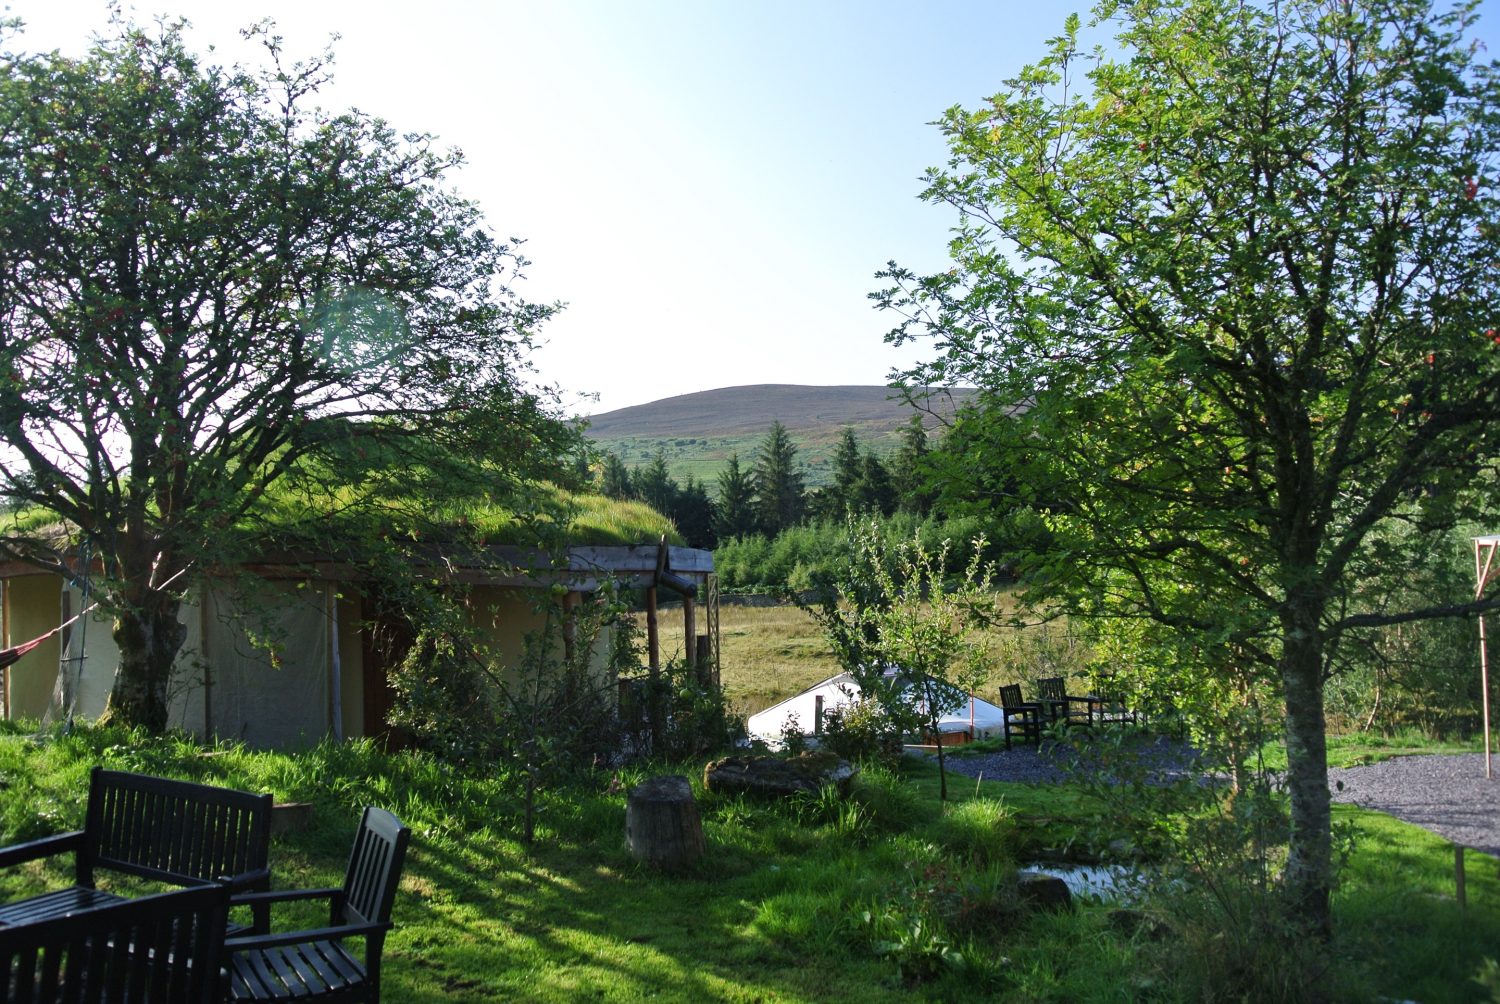 Ty Mam Mawr eco retreat centre straw bale round house and mongolian yurt looking out at Moel y Henfaes in North Wales